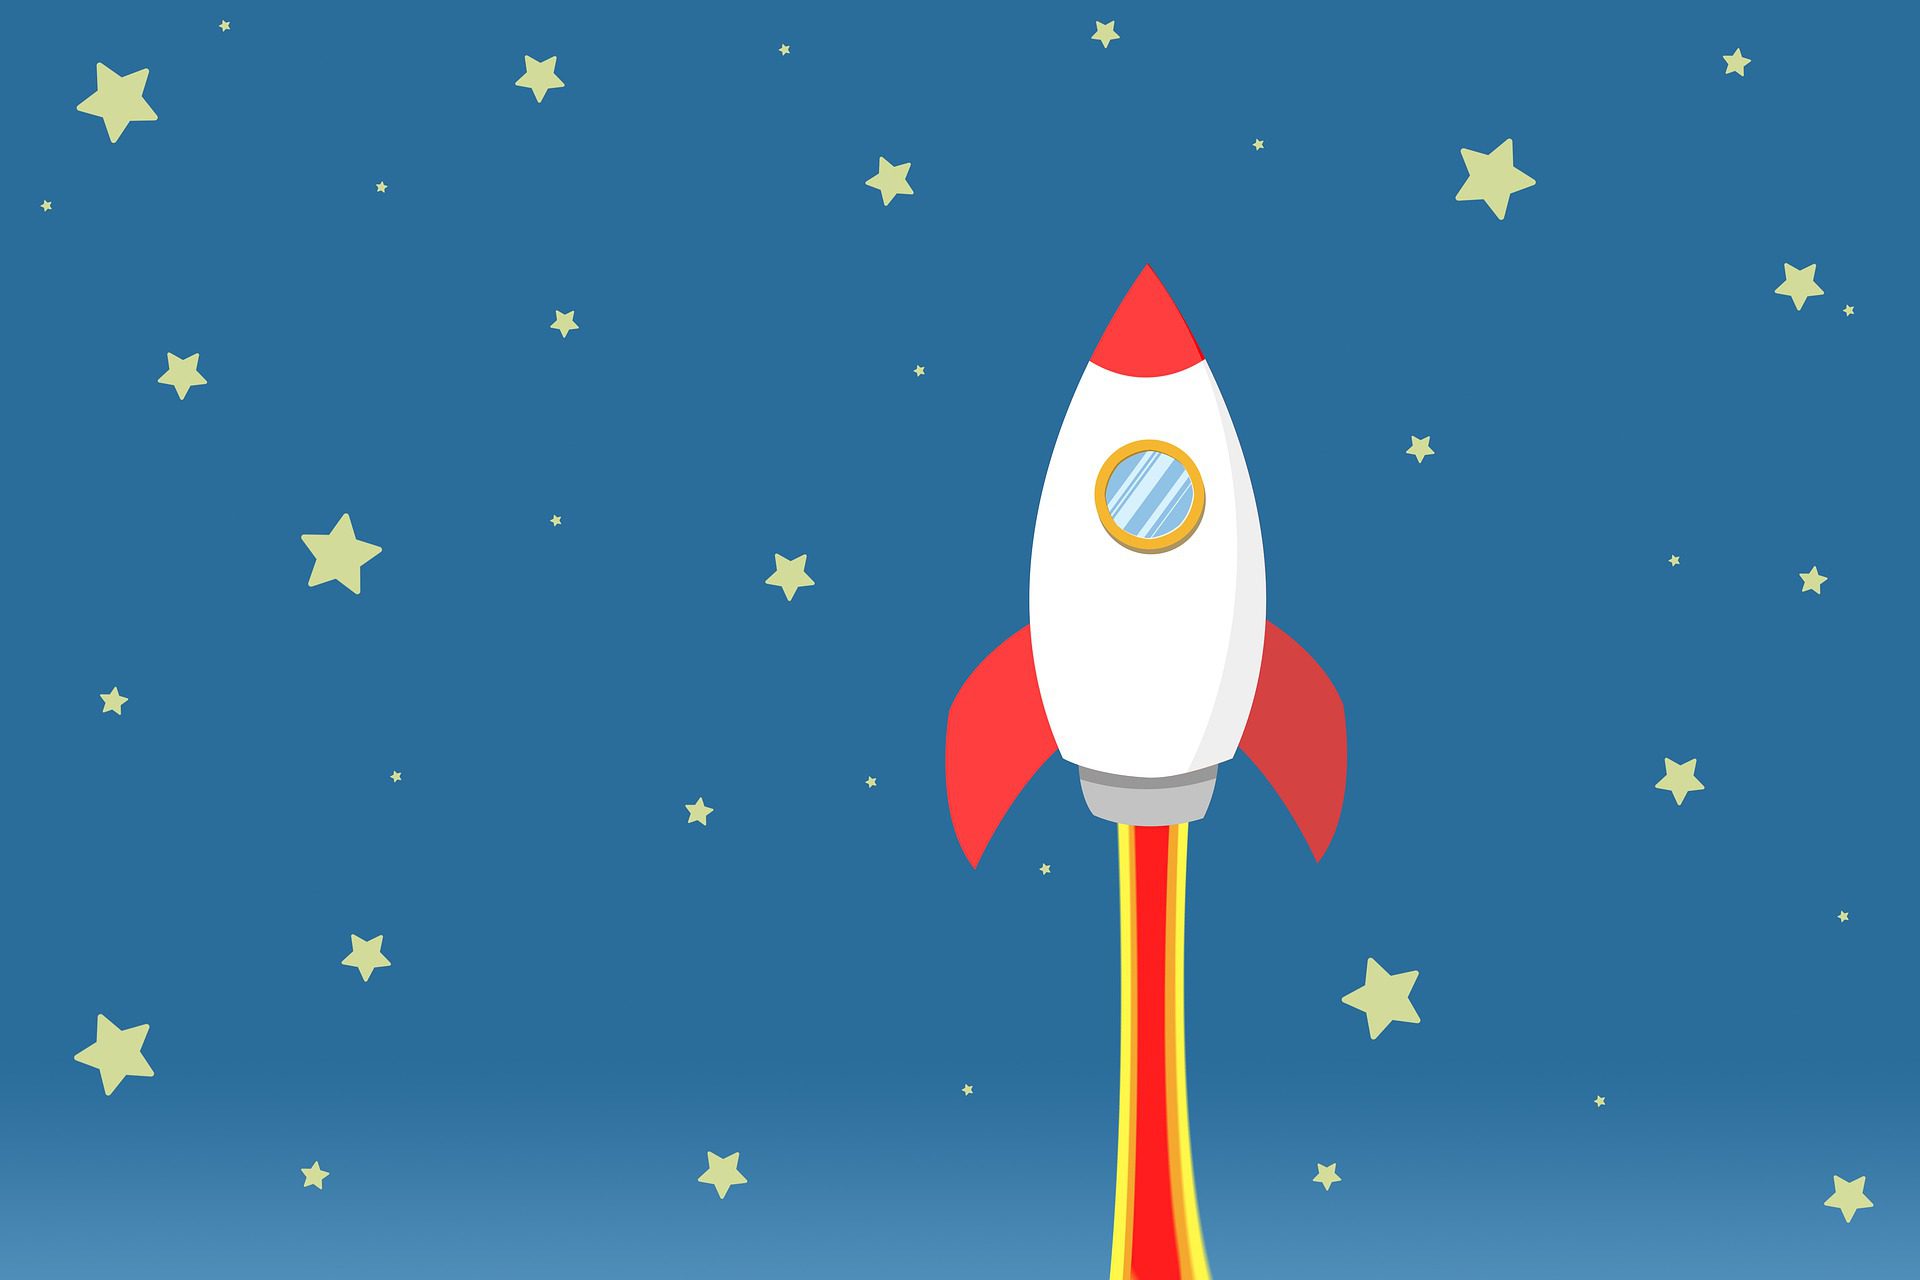 7 Types Of Posts Guaranteed To Skyrocket Your Facebook Engagement